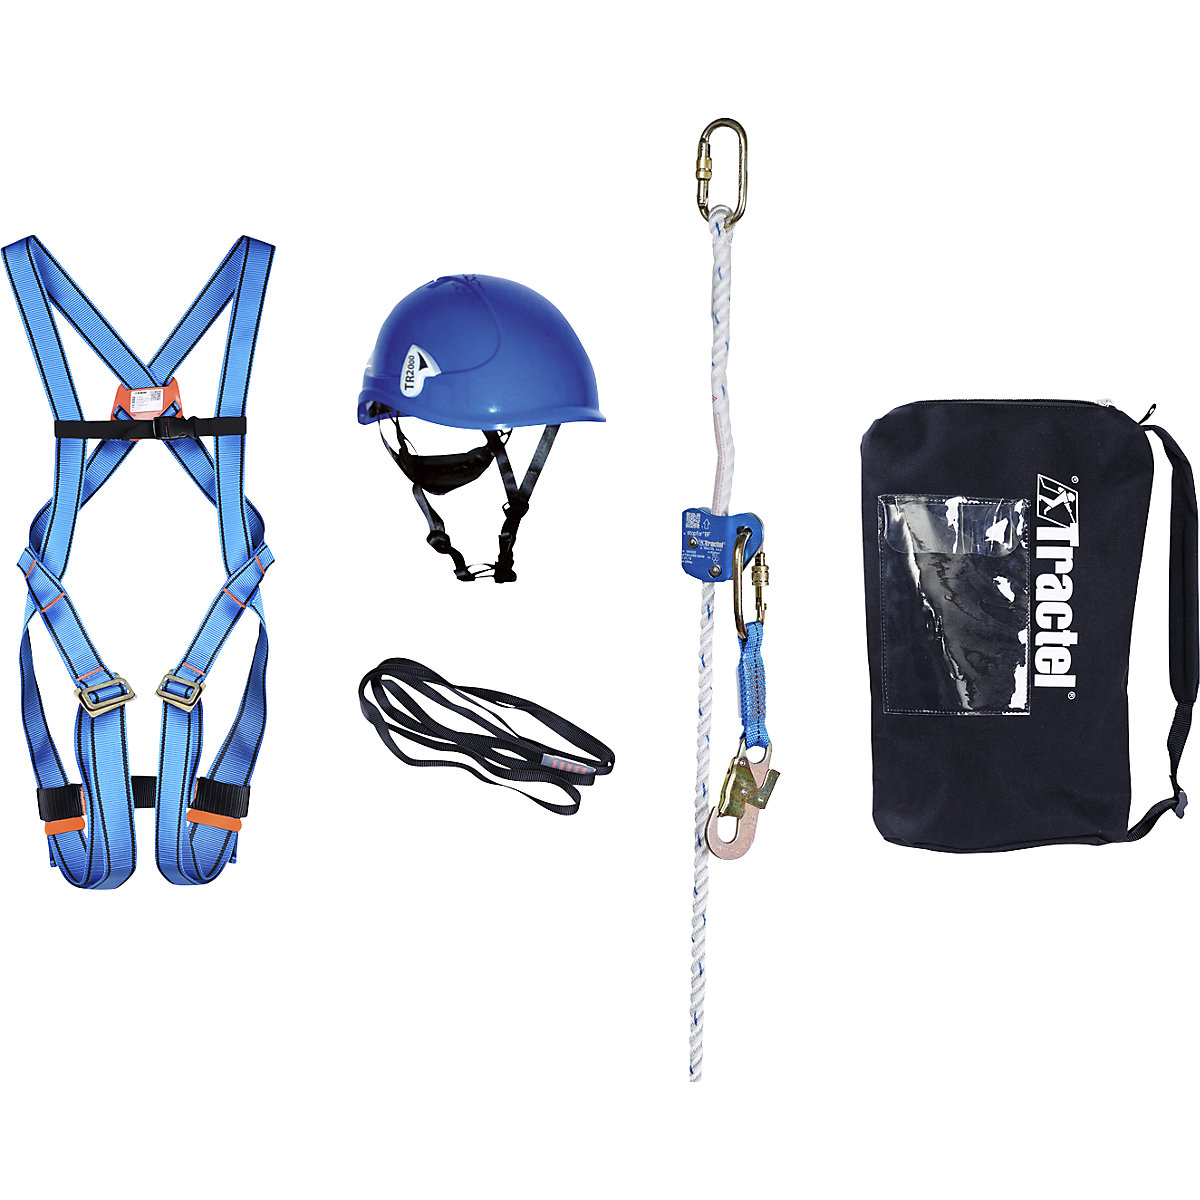 DIY PPE fall protection set